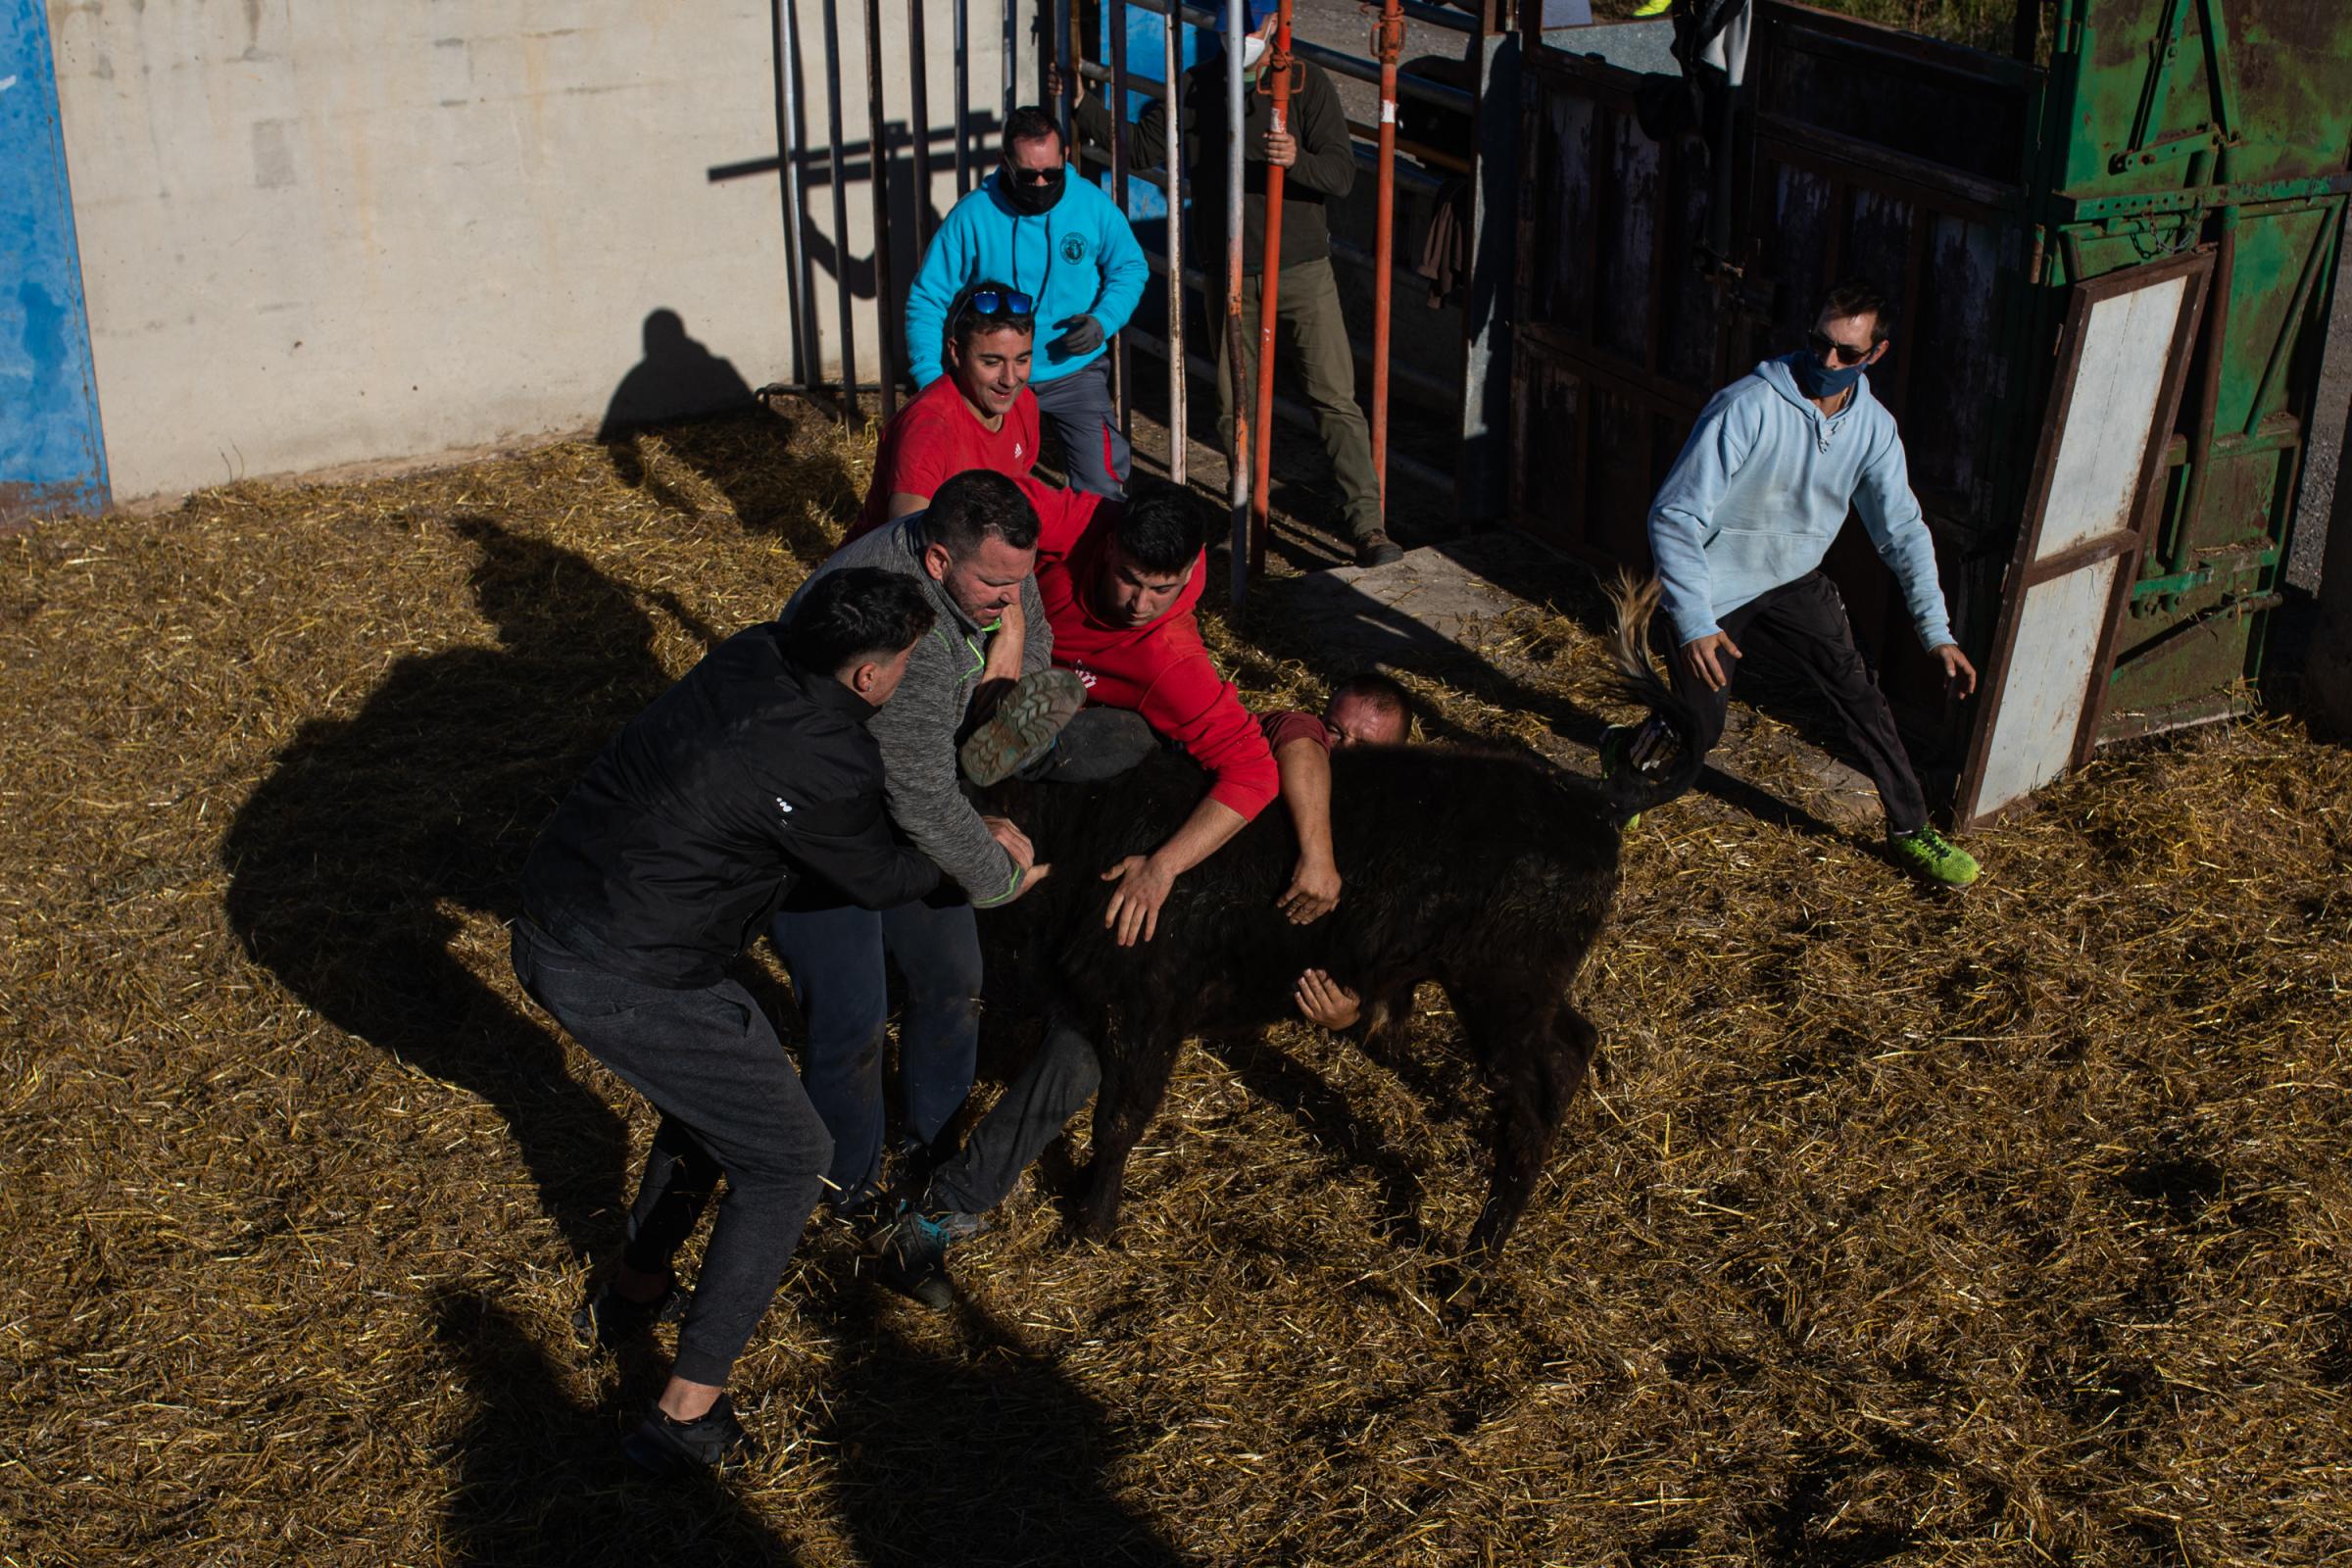 Spain's Dwindling Bullfighting Traditions - VALENCIA, SPAIN - DECEMBER 04: Ranchers attempt to...